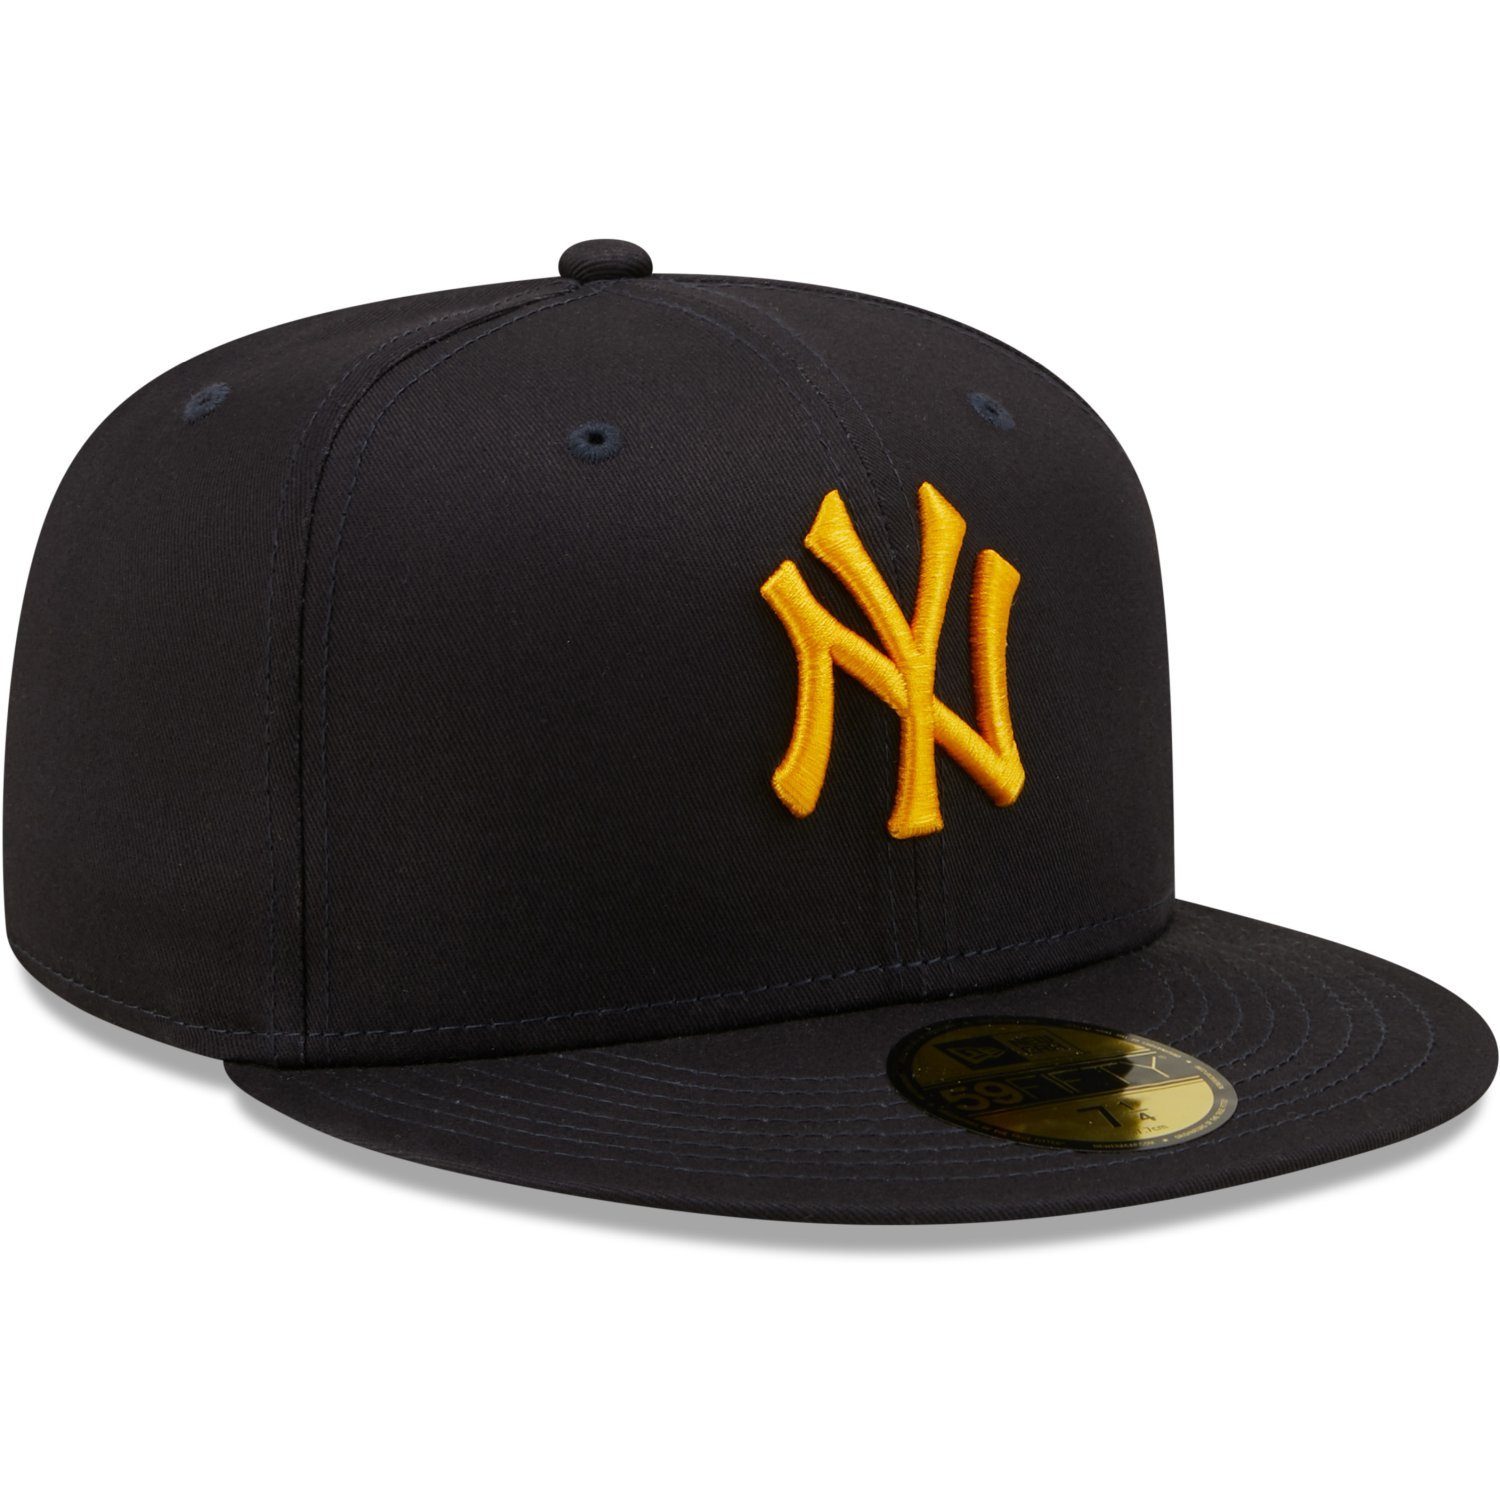 Fitted New Yankees gold Cap New 59Fifty York Era